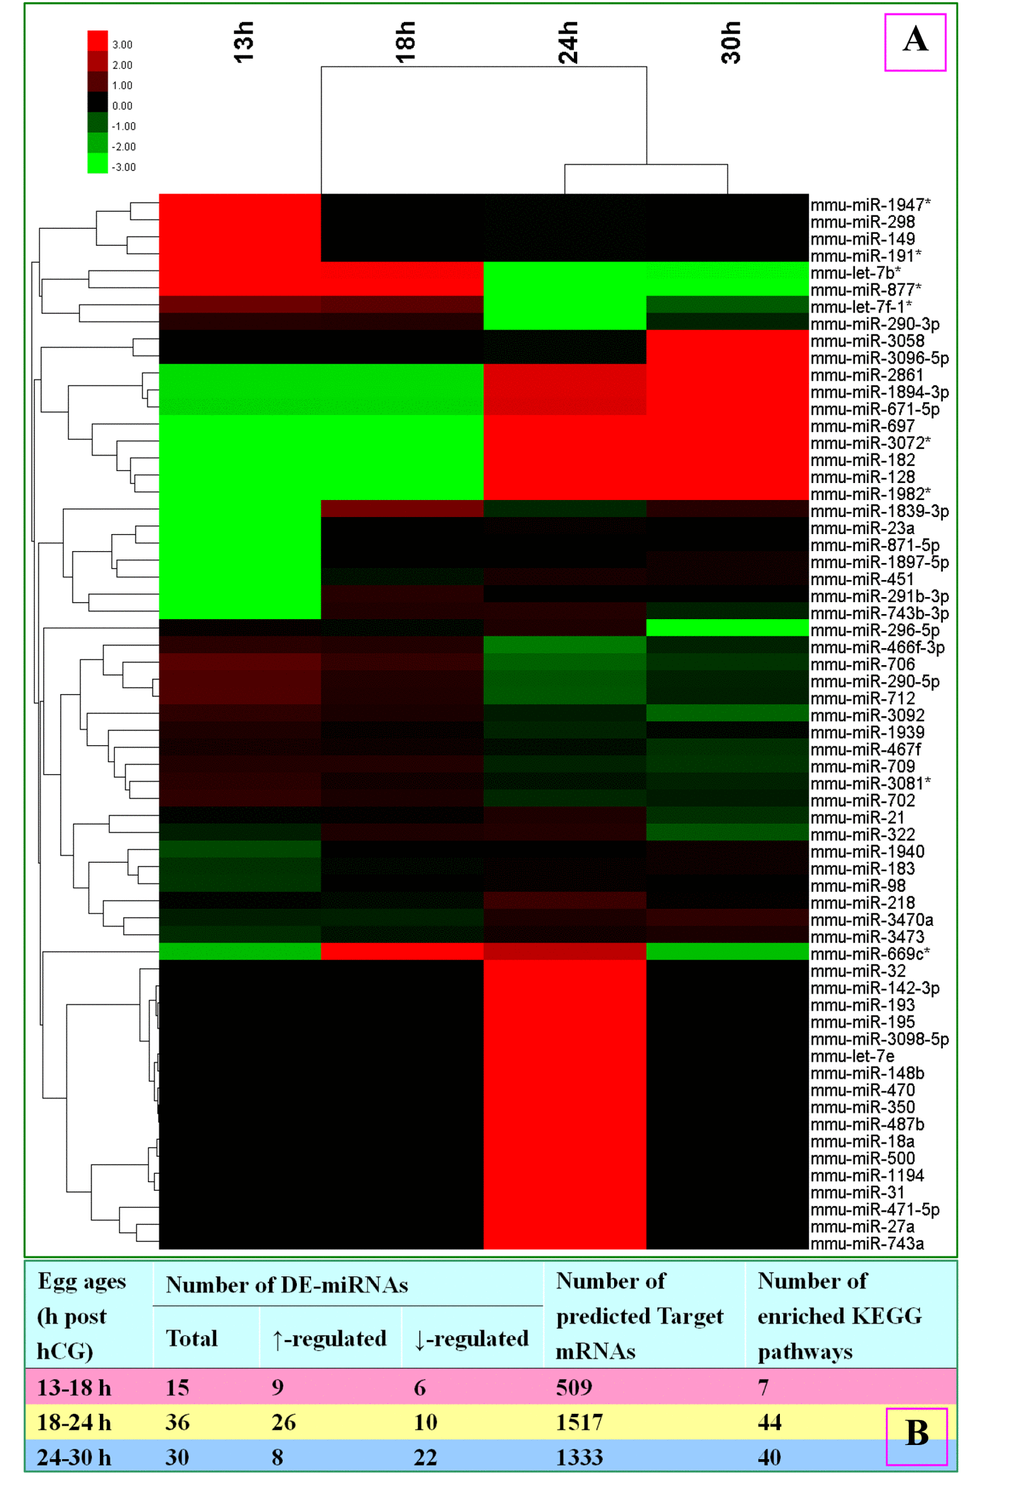 A microarray assay of miRNA expression profiles and a KEGG pathway enrichment analysis of target mRNAs predicted from differentially-expressed (DE) miRNAs in mouse oocytes aging for different times. (A) Heat map and cluster analysis of miRNA expression in oocytes aging for different times. Red indicates high relative expression and green indicates low relative expression. Fold changes greater than 2 (FC>2) were used as threshold for miRNA differential expression. (B) A table shows number of DE miRNAs, number of target mRNAs predicted from DE miRNAs and number of enriched KEGG pathways in oocytes aging for different times.